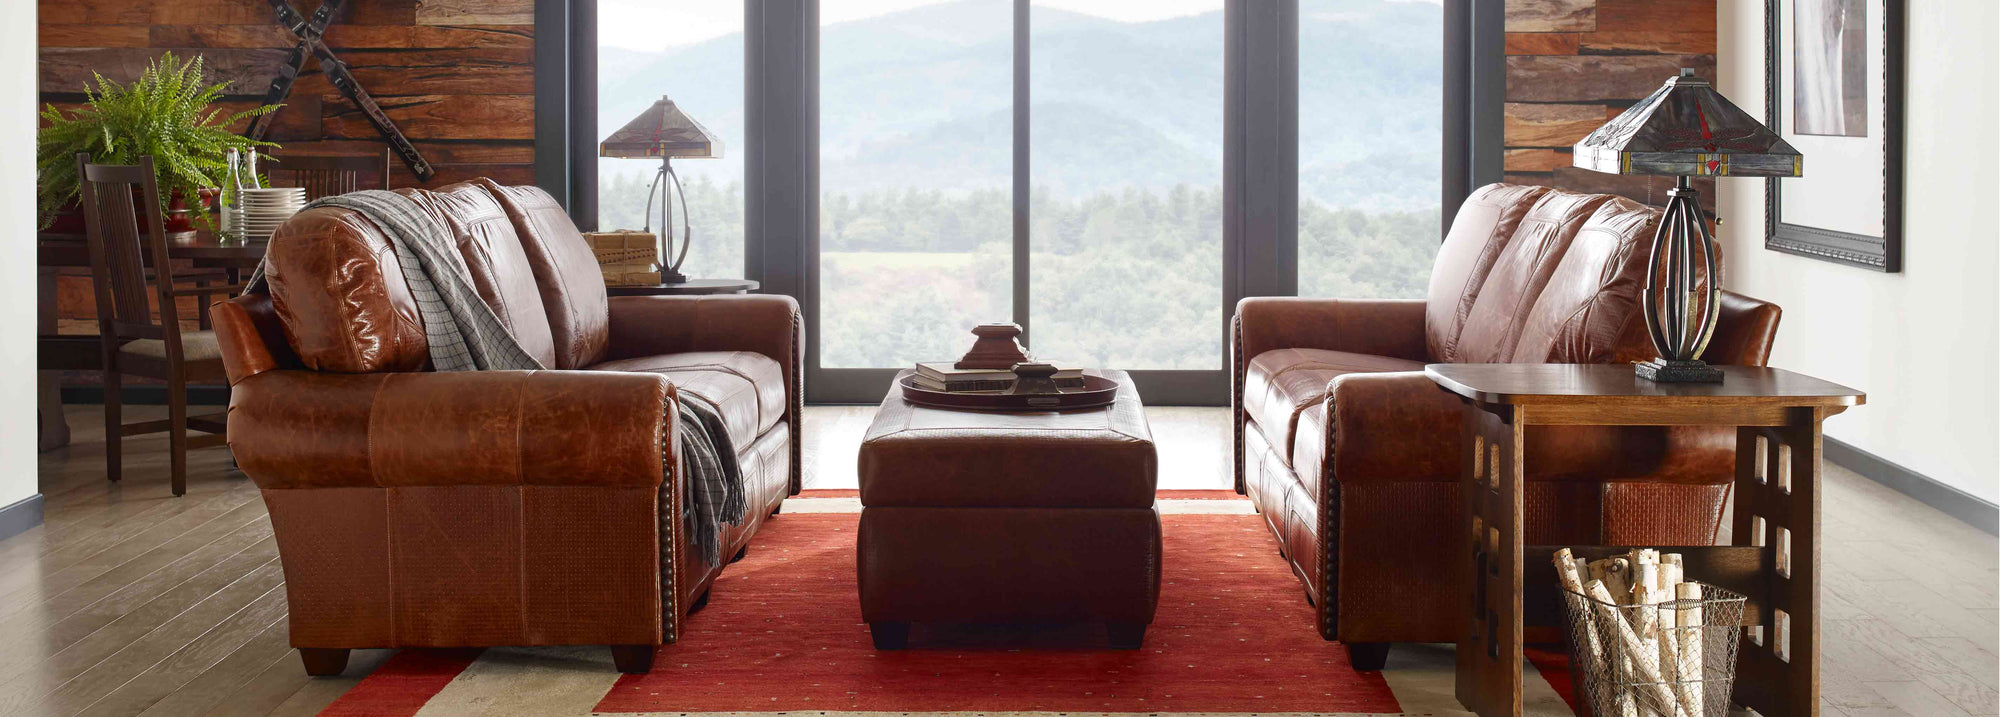 Two brown leather Santa Fe Sofas sit across from each other with a matching Santa Fe Ottoman between them, there is a large glass window in the background showing mountains outside